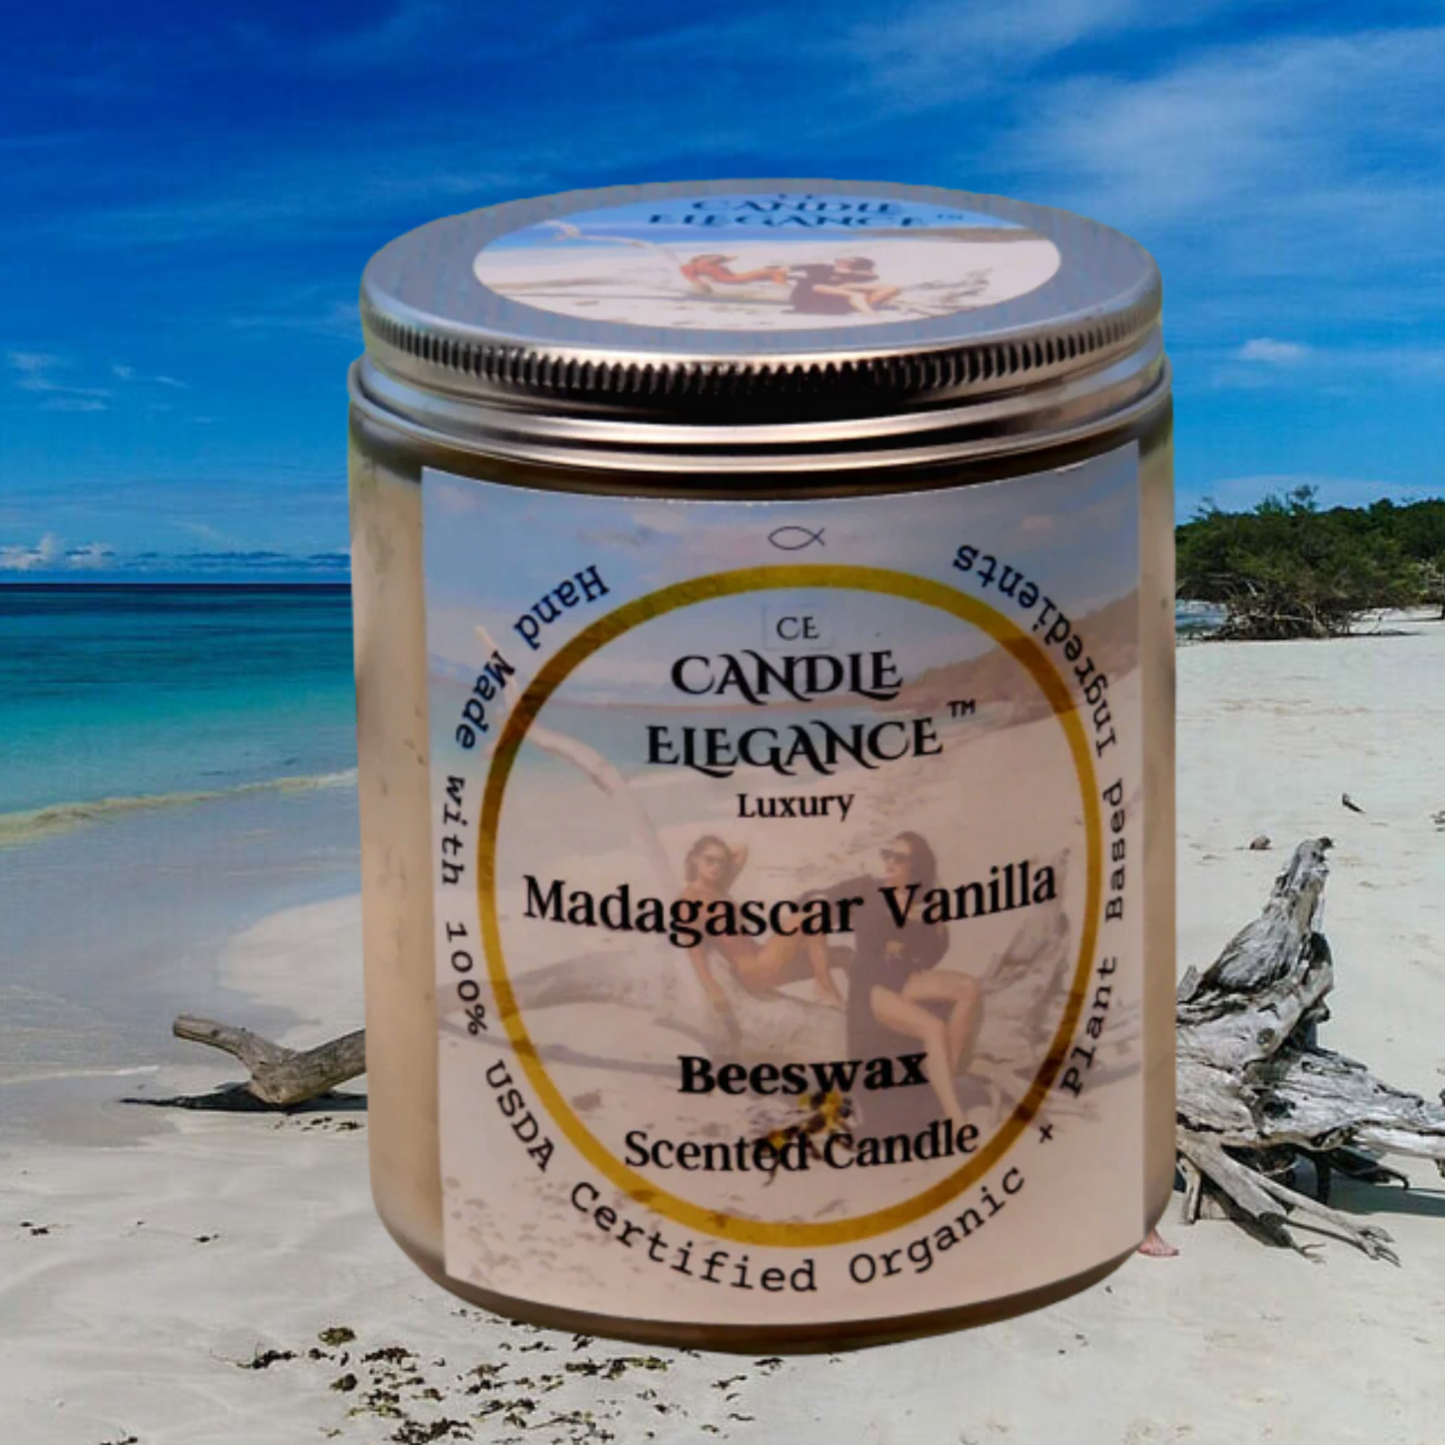 Made in USA with 100% Organic ingredients always! Candle Elegance Madagascar Vanilla Trio express is a great way to add a sweet and relaxing scent to your home, workplace, or travels. It features a rich and creamy essential scent of Madagascar vanilla beans.